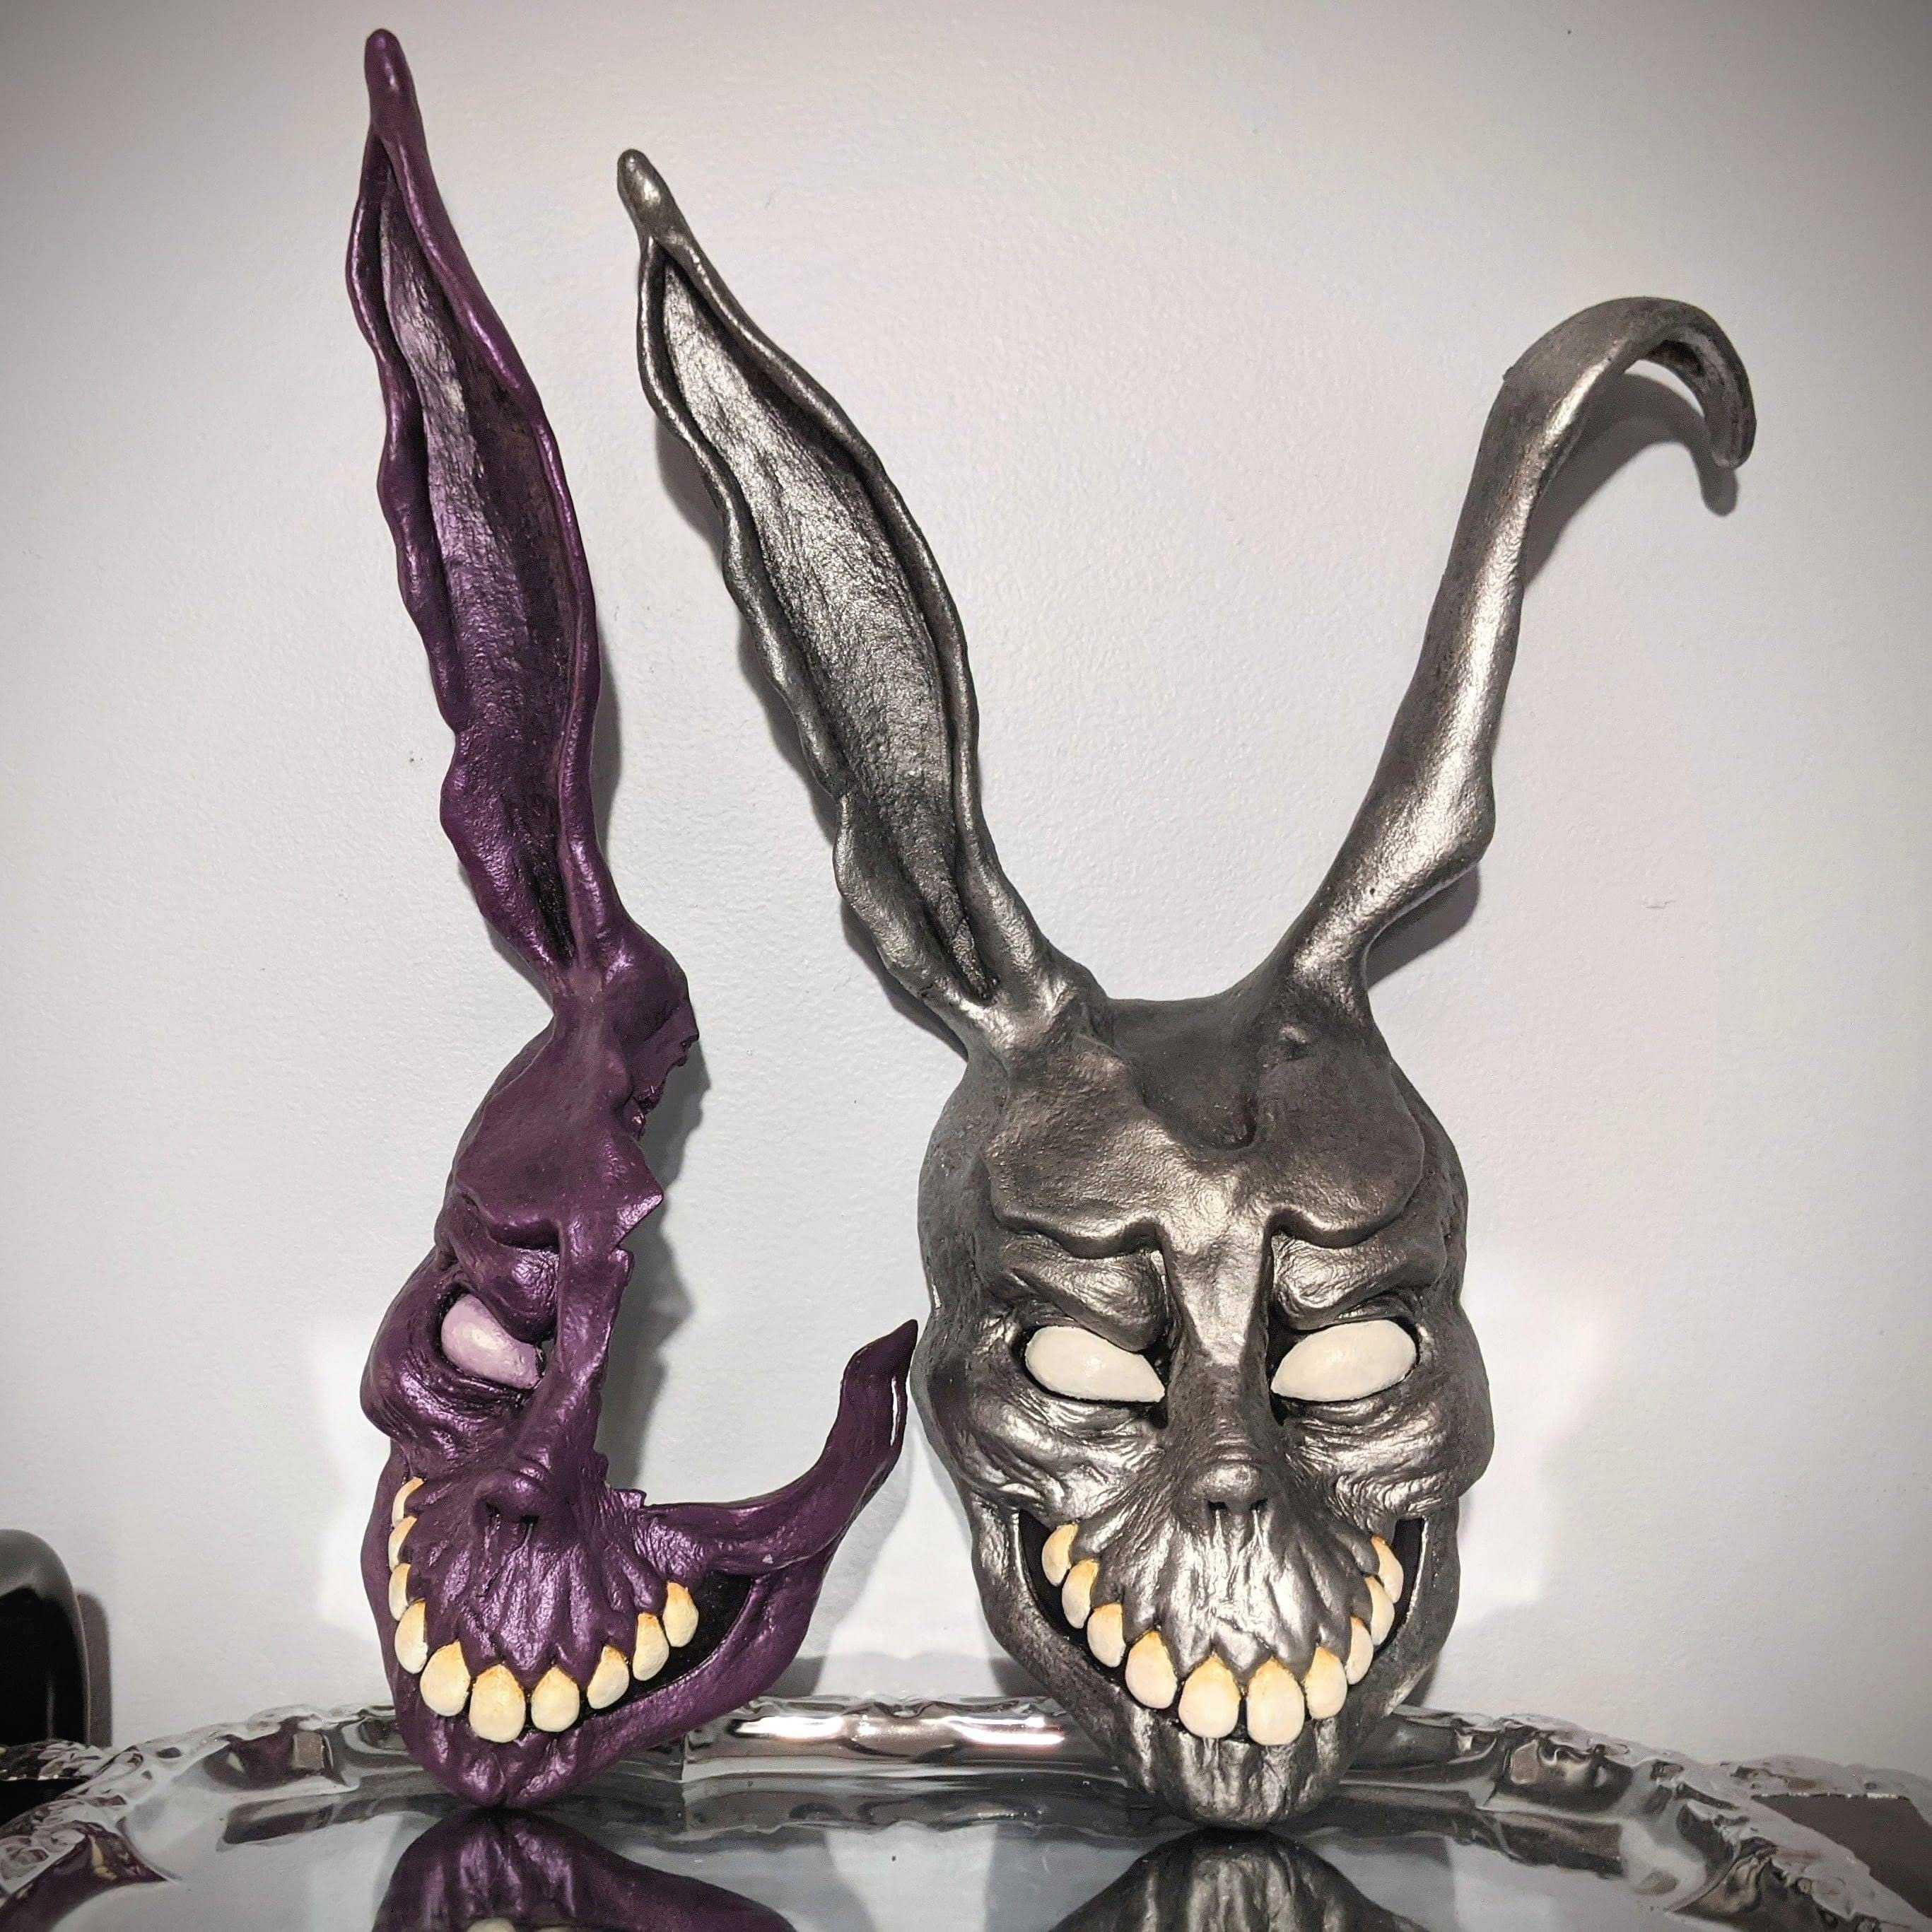 Frank the Bunny Donnie Darko Mask and Wall Mount Damaged - Etsy